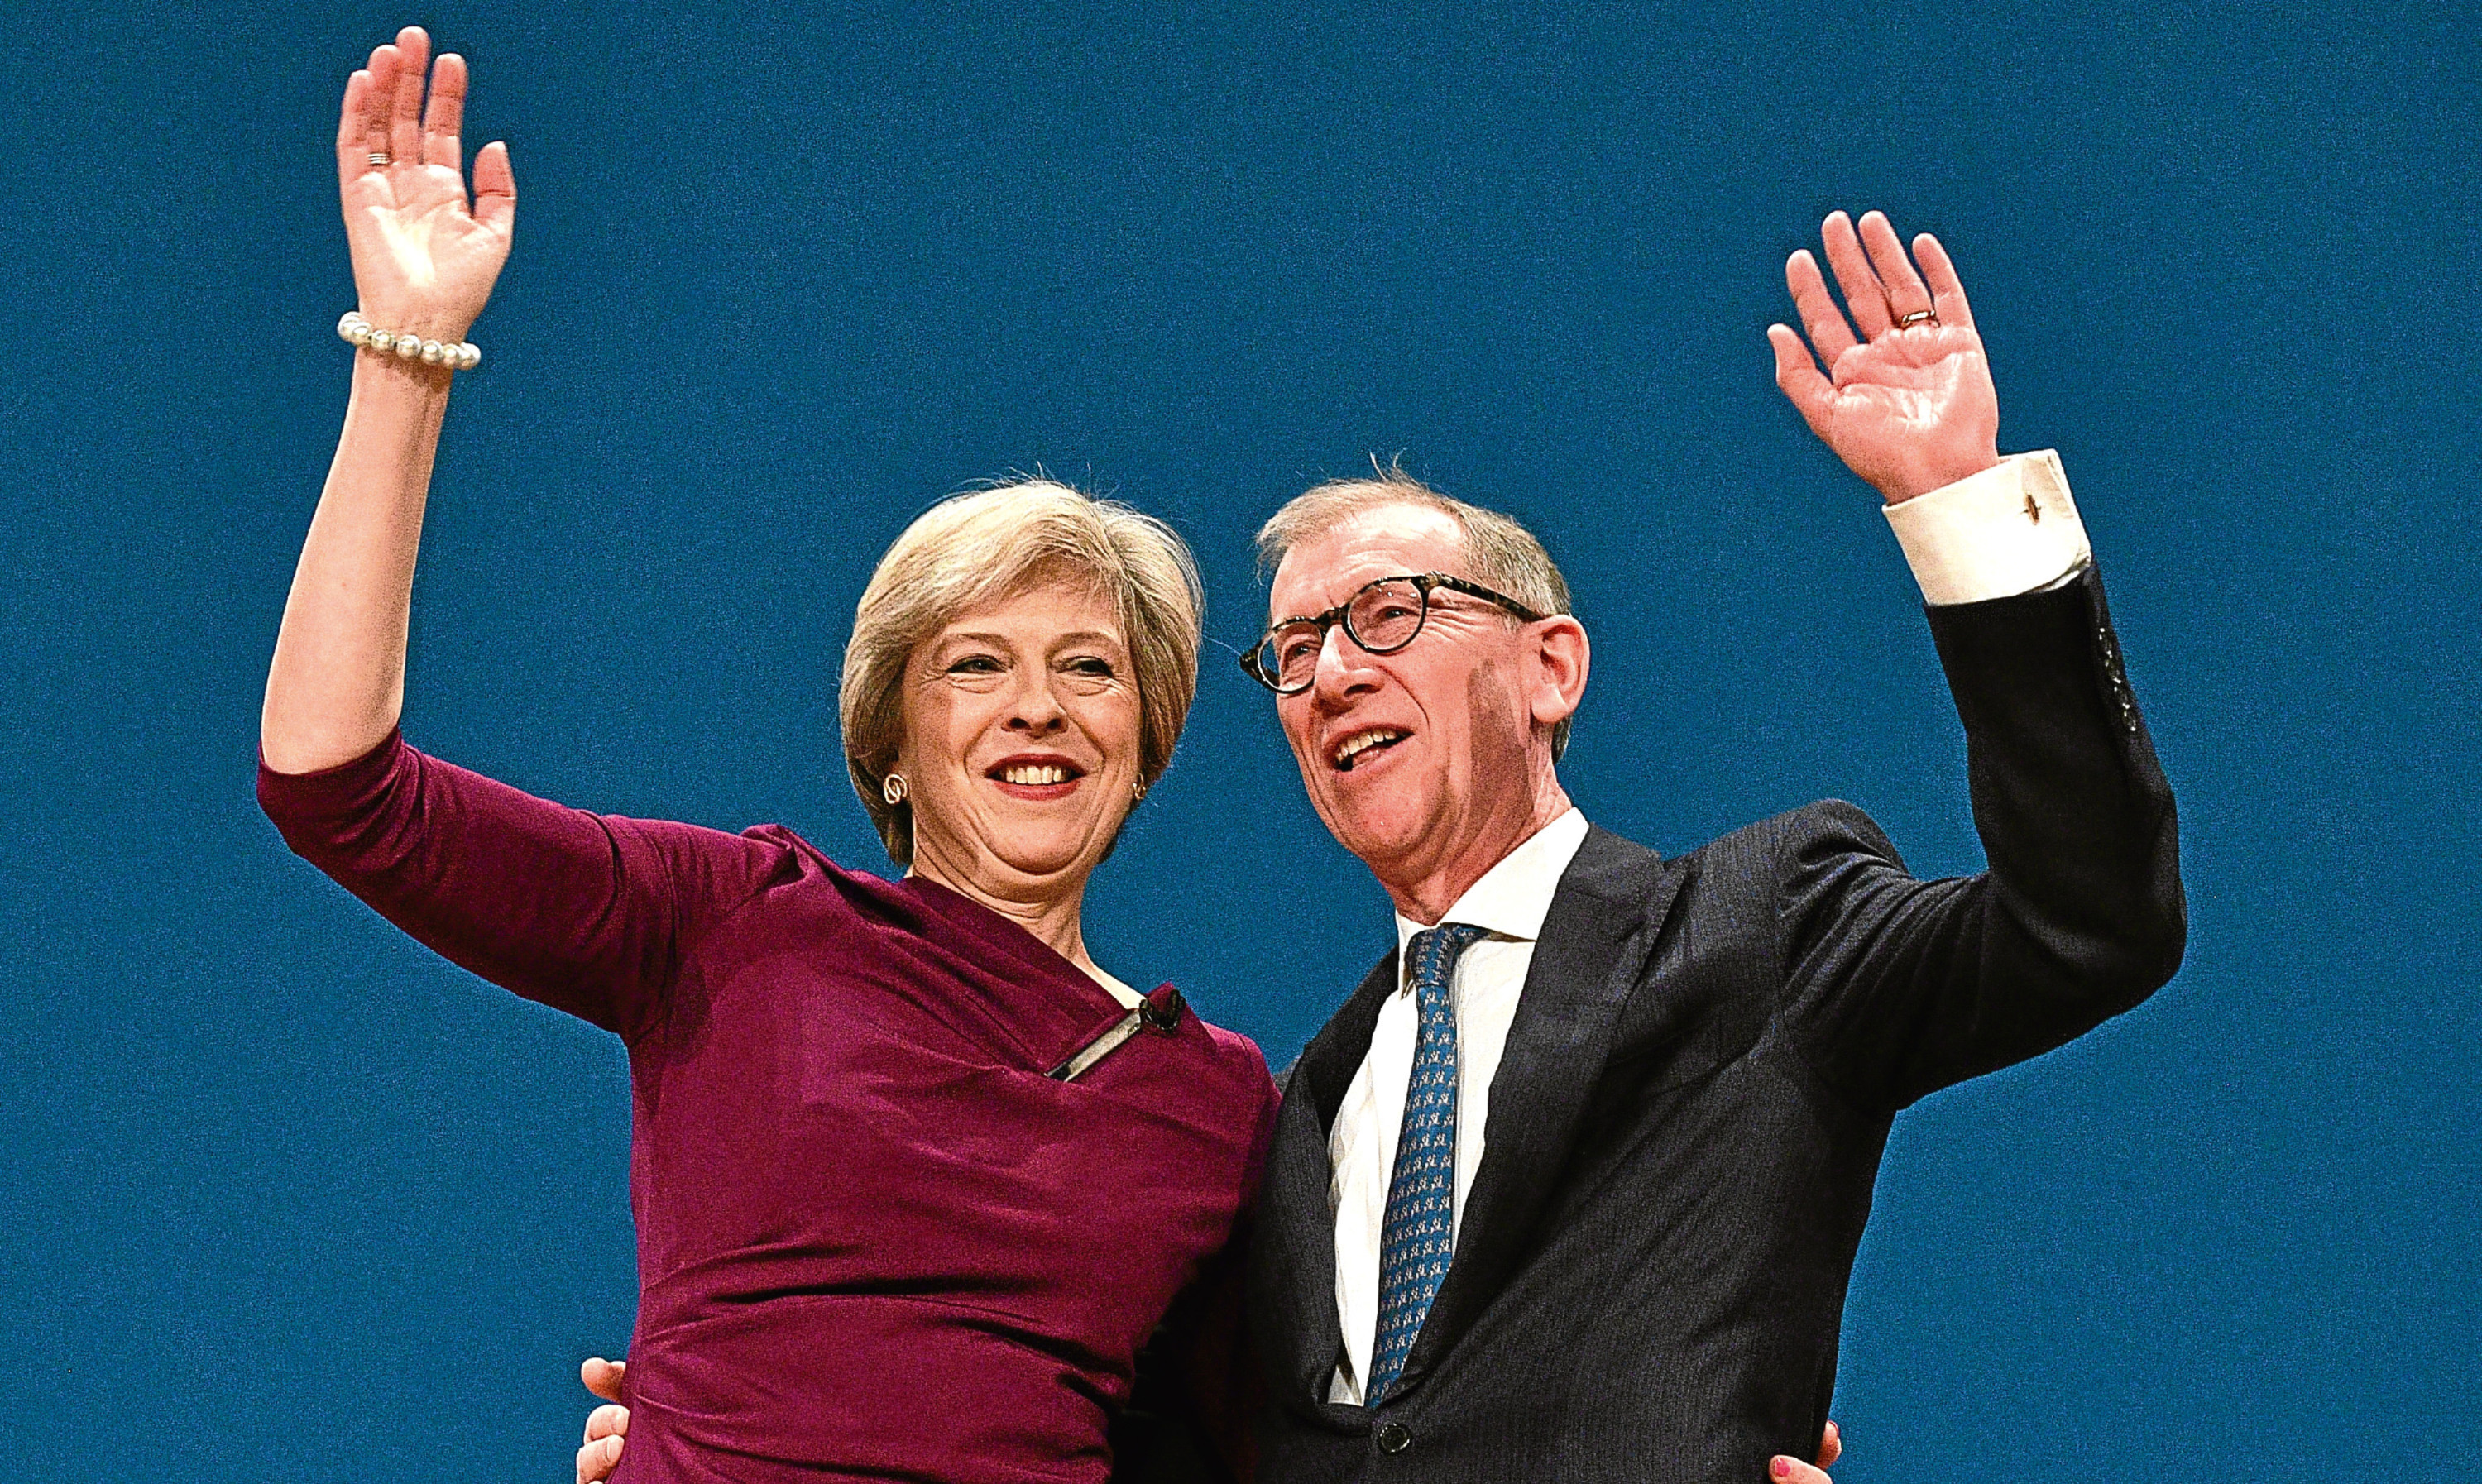 Theresa May and her Husband Philip John embrace after her speech at the Tory Party conference.